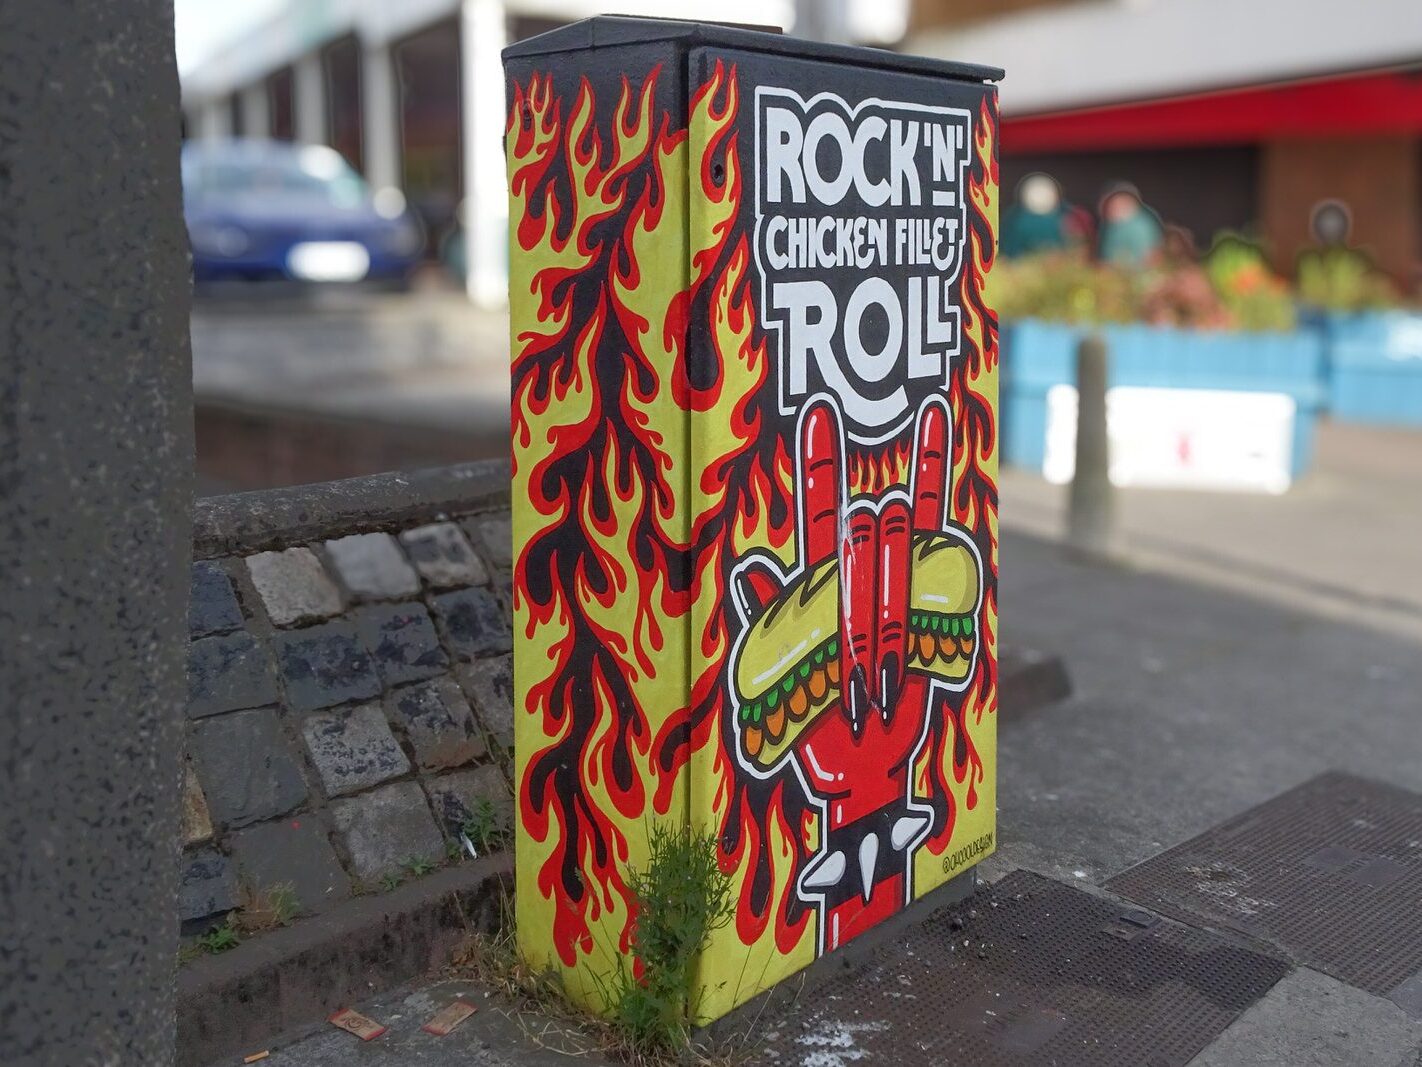 ROCK AND CHICKEN FILLET ROLL ON PRUSSIA STREET [PAINT-A-BOX BY MARTA OKUKICZ] X-236744-1